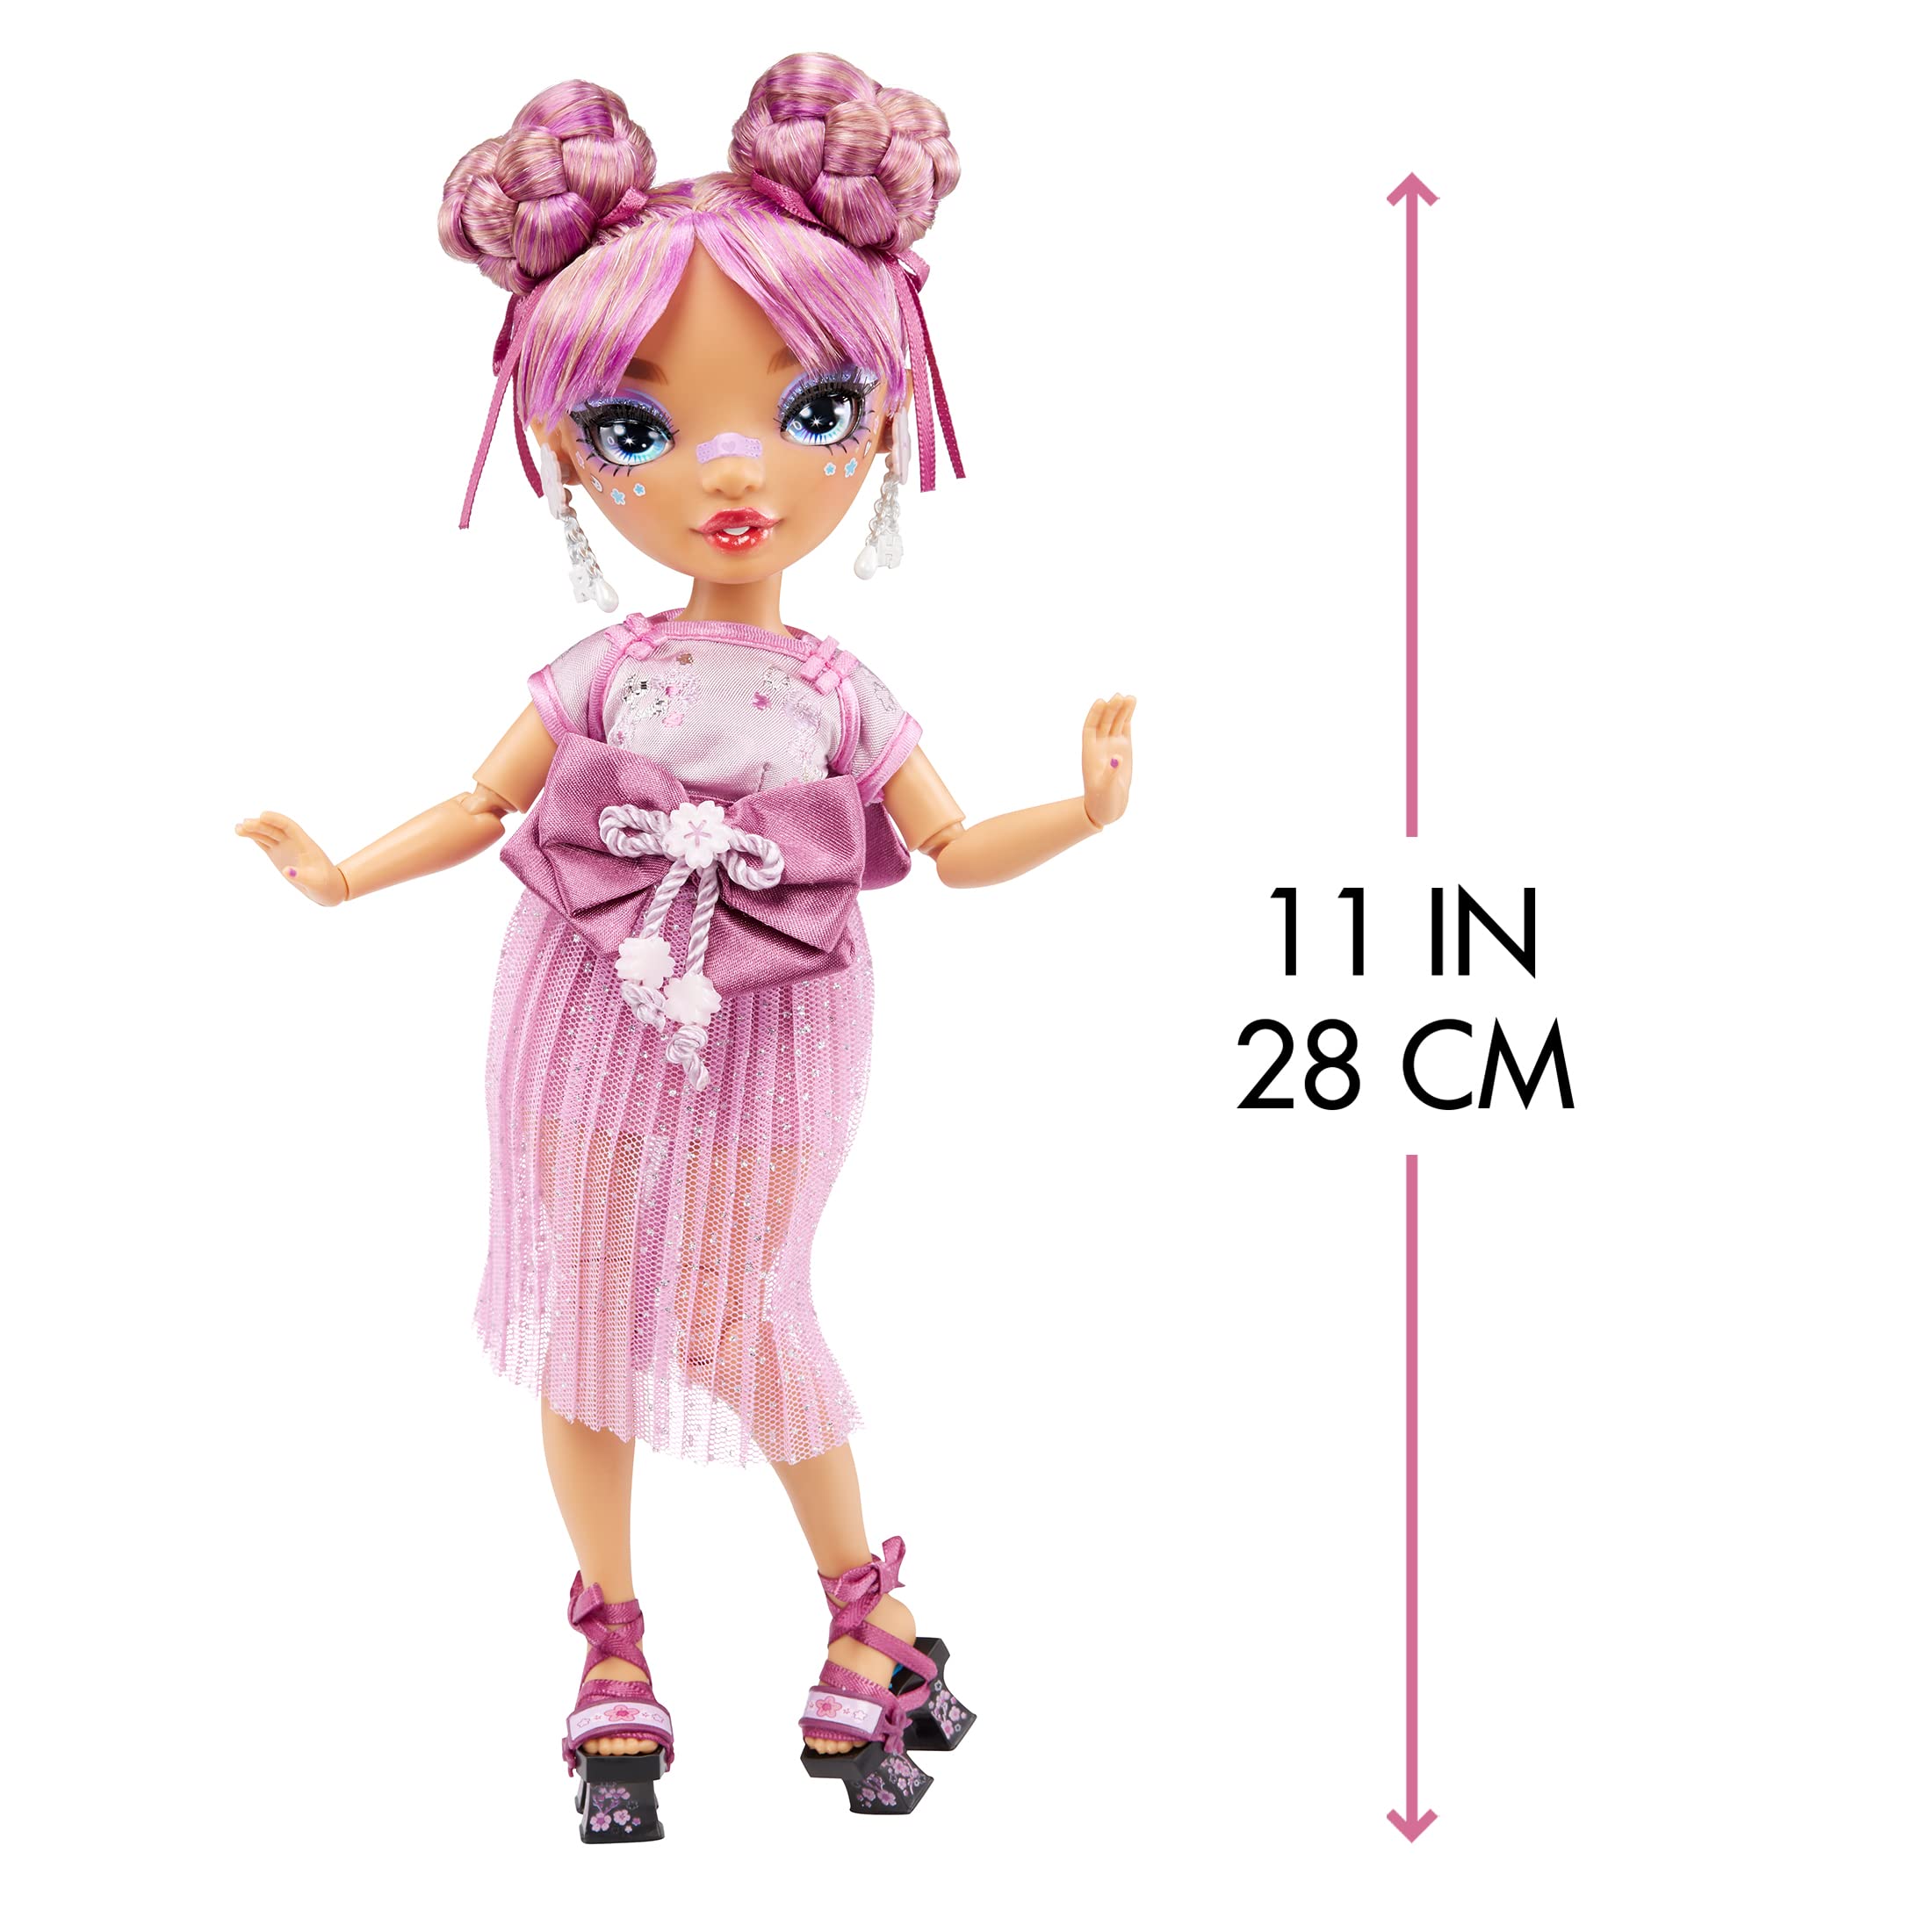 Rainbow High Lila Yamamoto- Mauve Purple Fashion Doll. 2 Designer Outfits to Mix & Match with Accessories, Great Gift for Kids 6-12 Years Old and Collectors